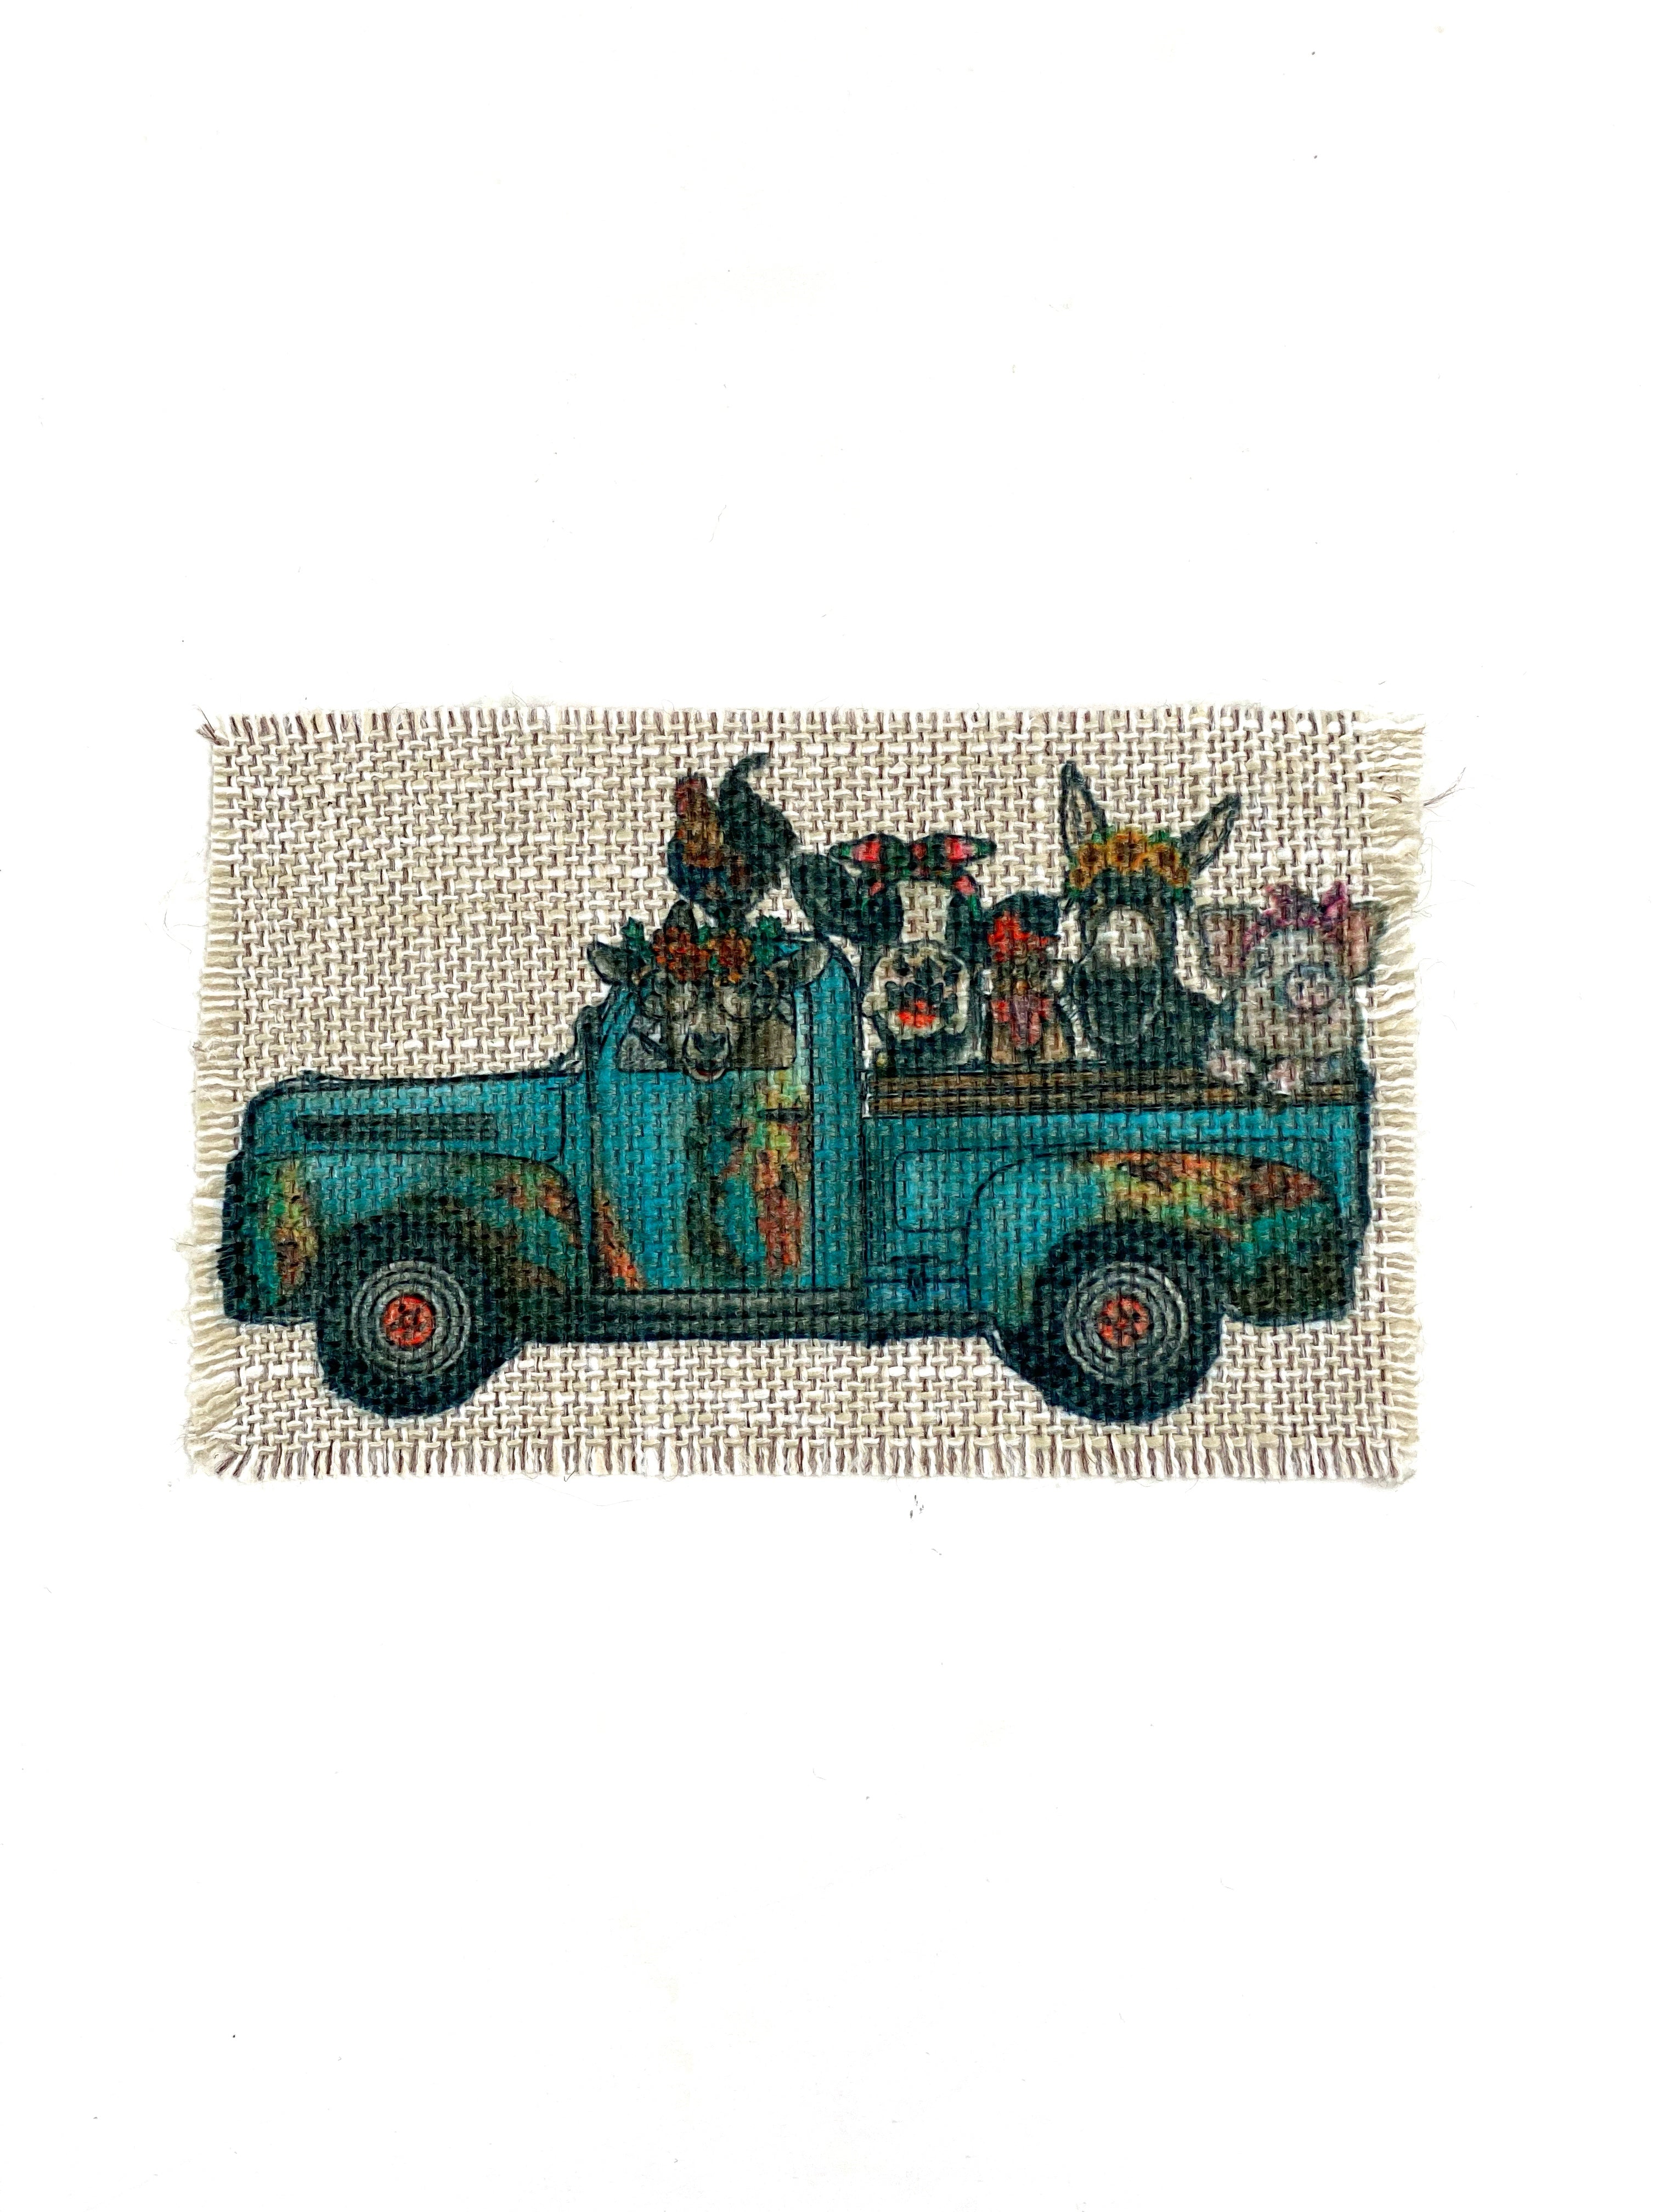 Patina Farm Truck Hat Patch, Burlap Linen Look Sublimation Patch, Glue or Iron On Hat Patch, Raggedy Hat Patch, Old Truck Patch